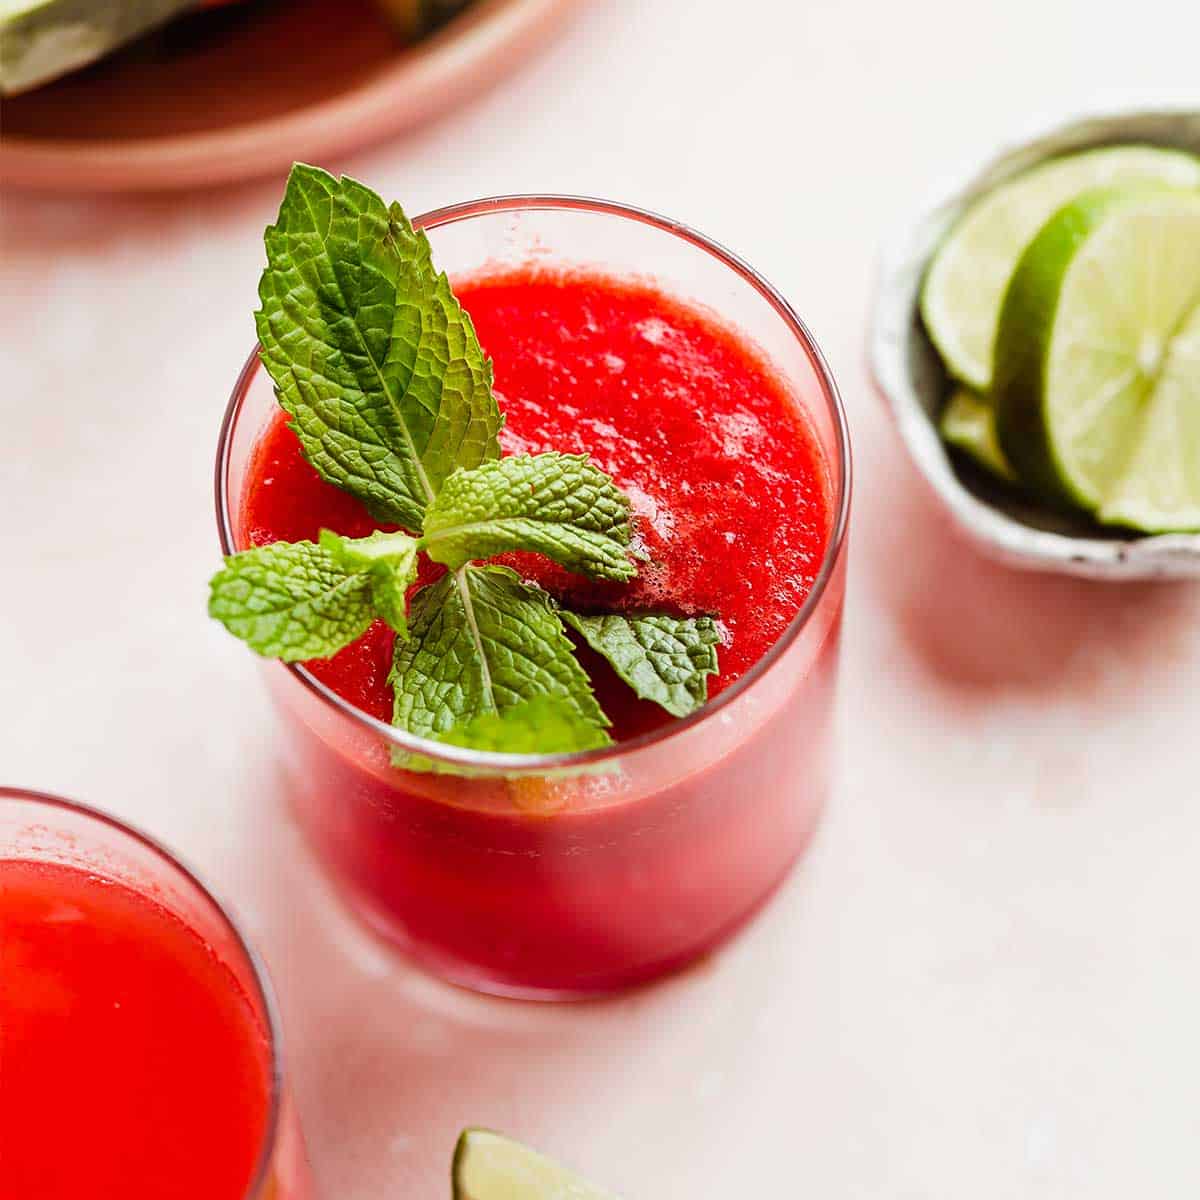 Watermelon Juice in a glass cup with a mint leaf for garnish.